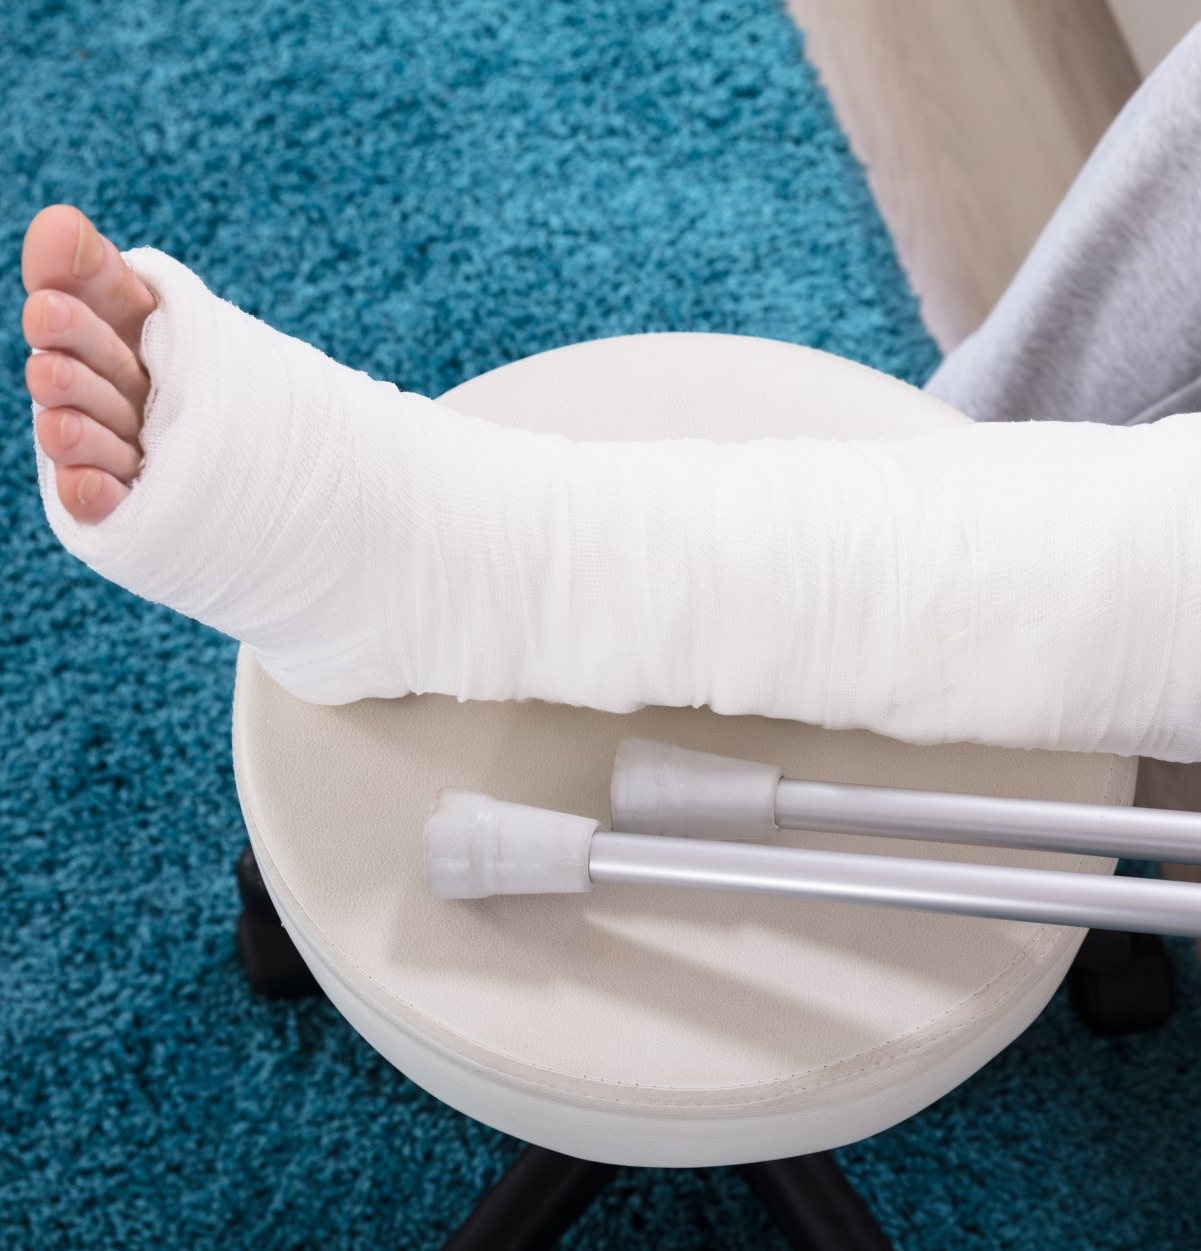 Patient unable to work with leg in plaster and crutches